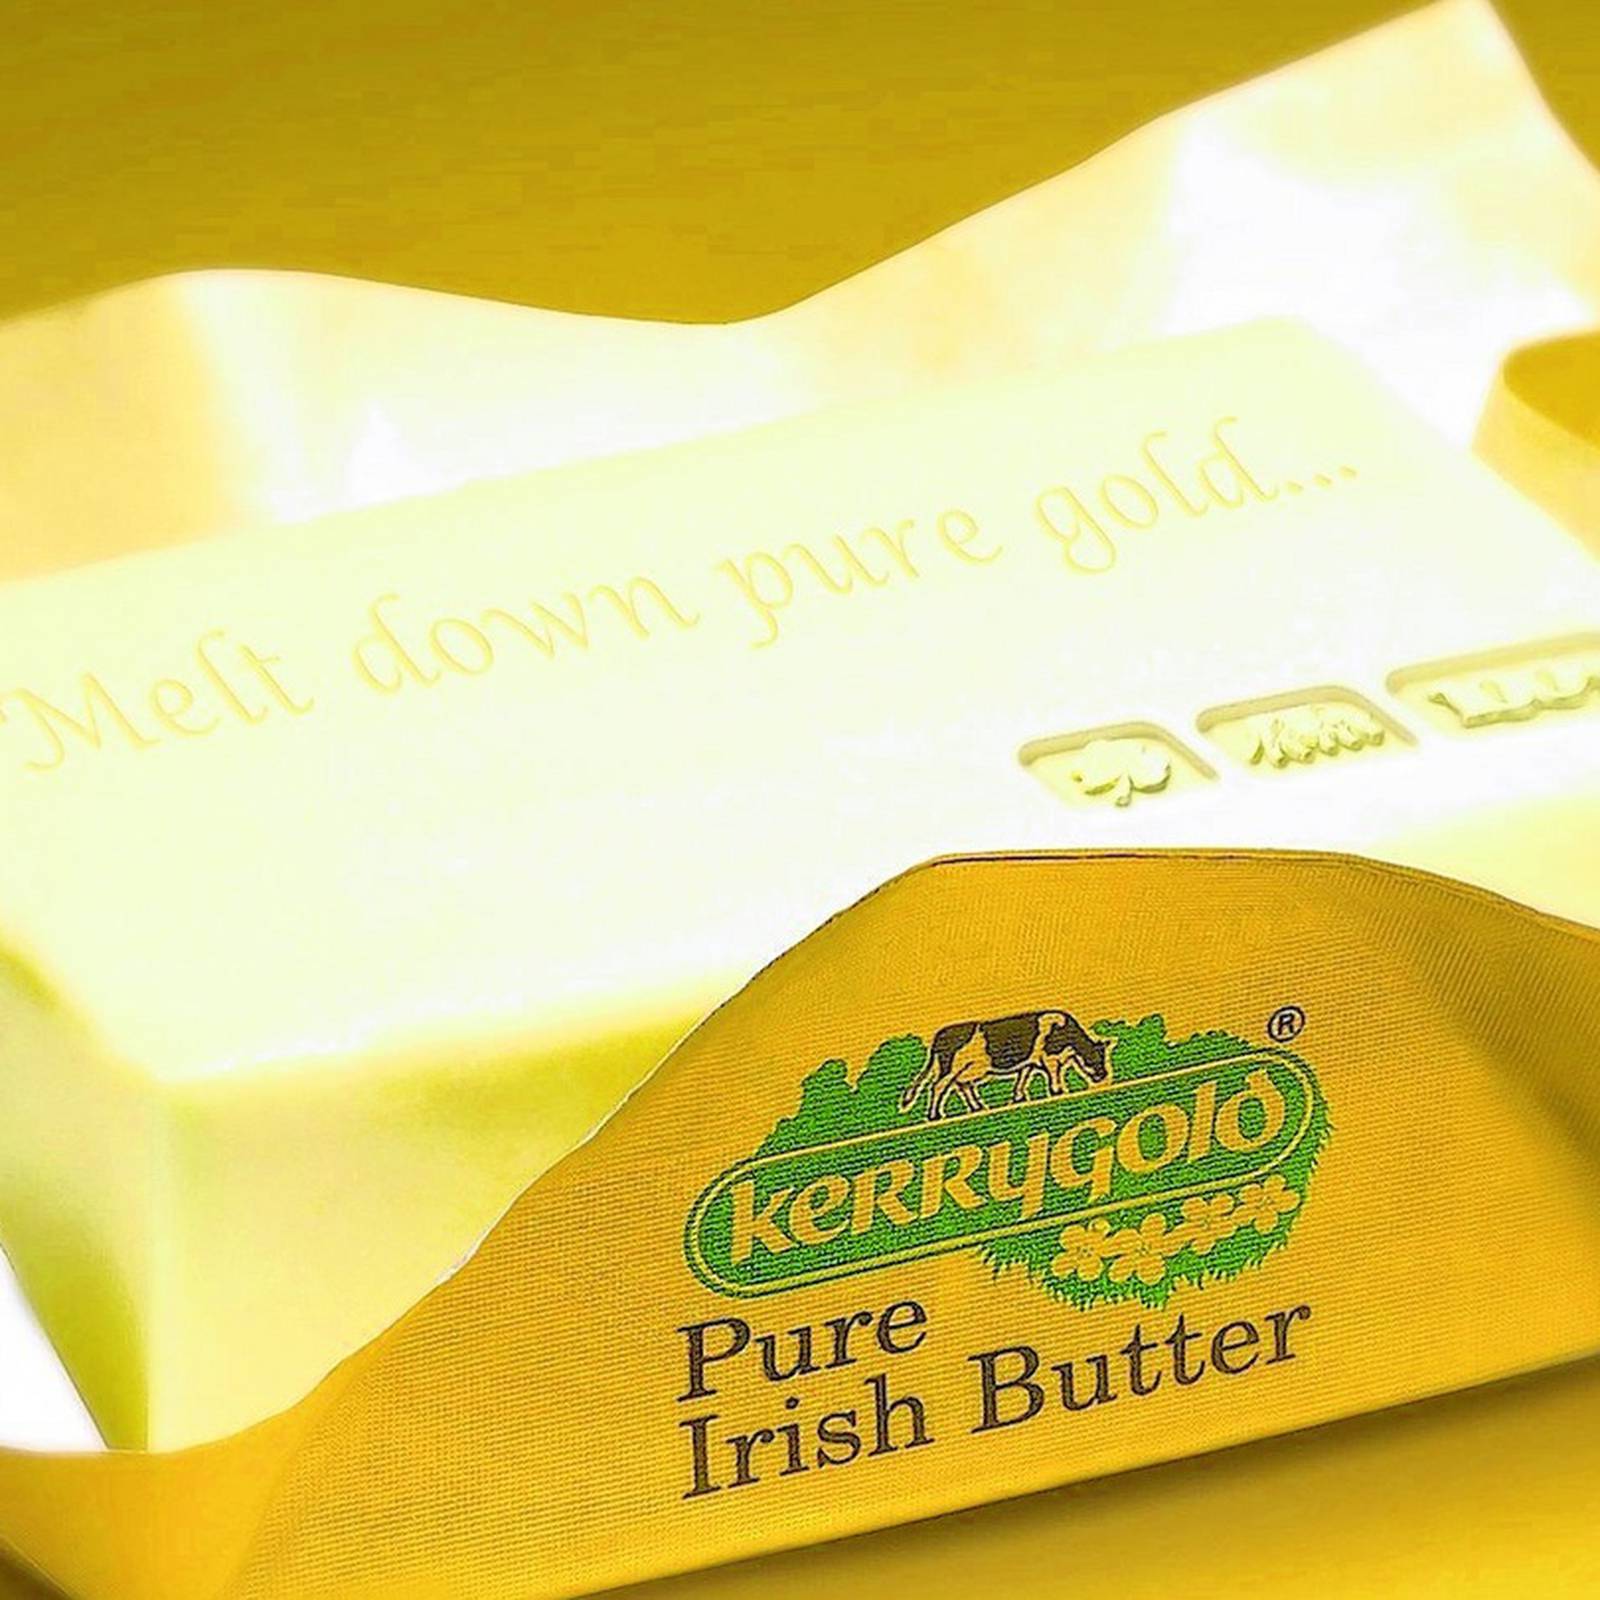 Kerrygold class action claims product falsely advertised as 'pure